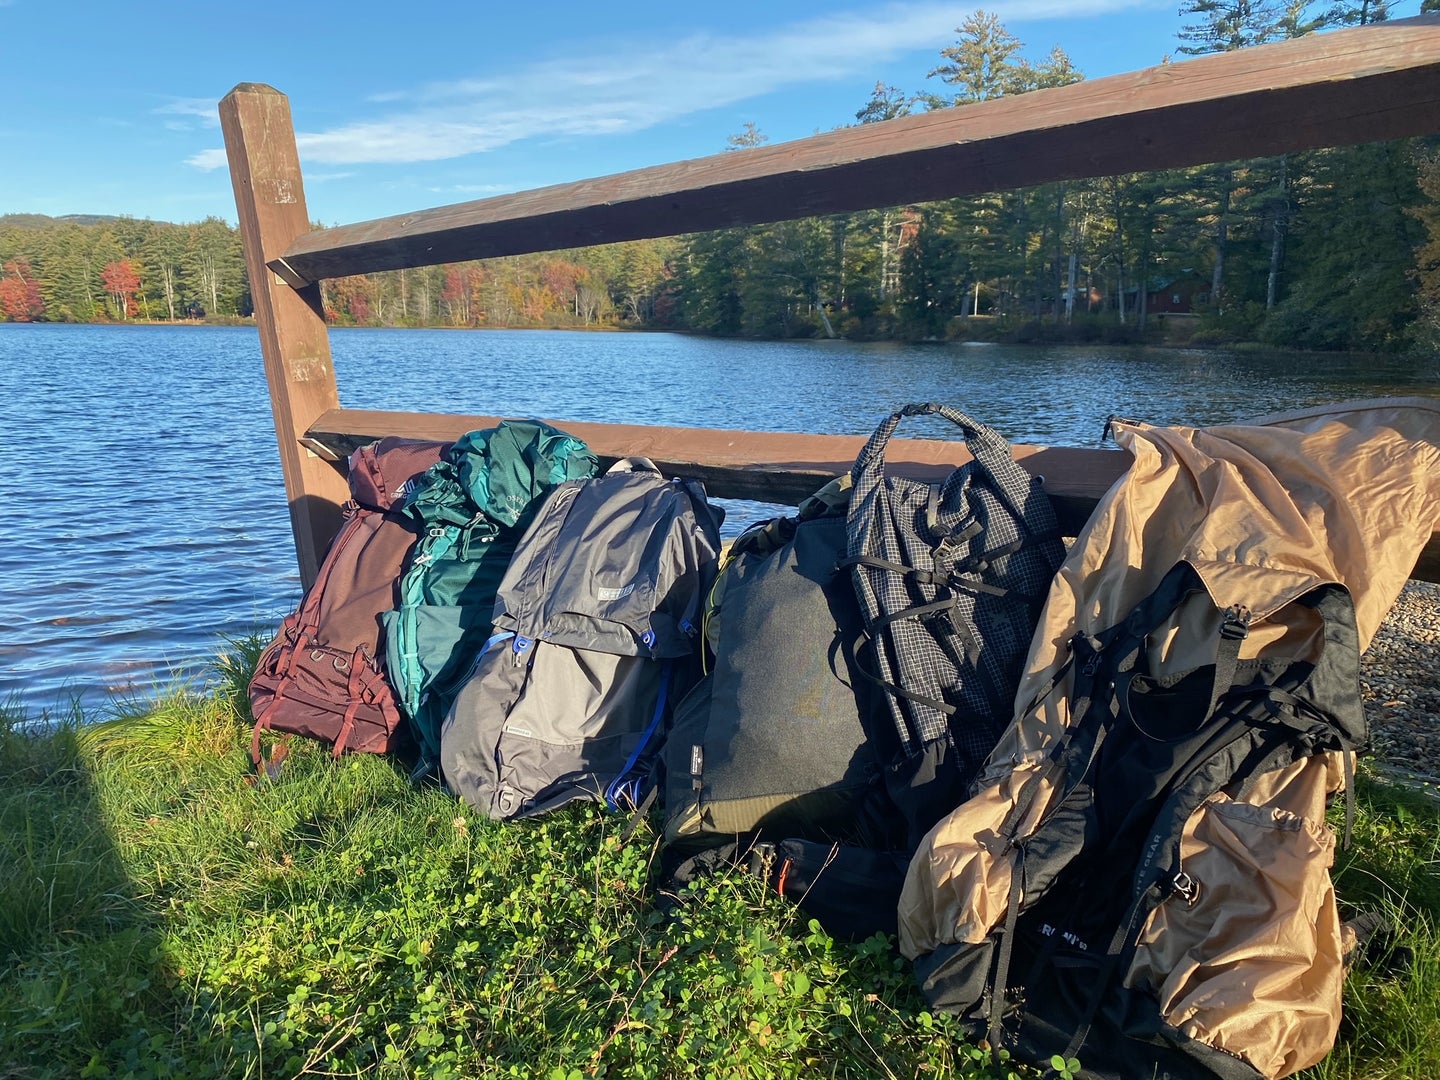 a line of backpacks leaning on a wooden fence next to a pond